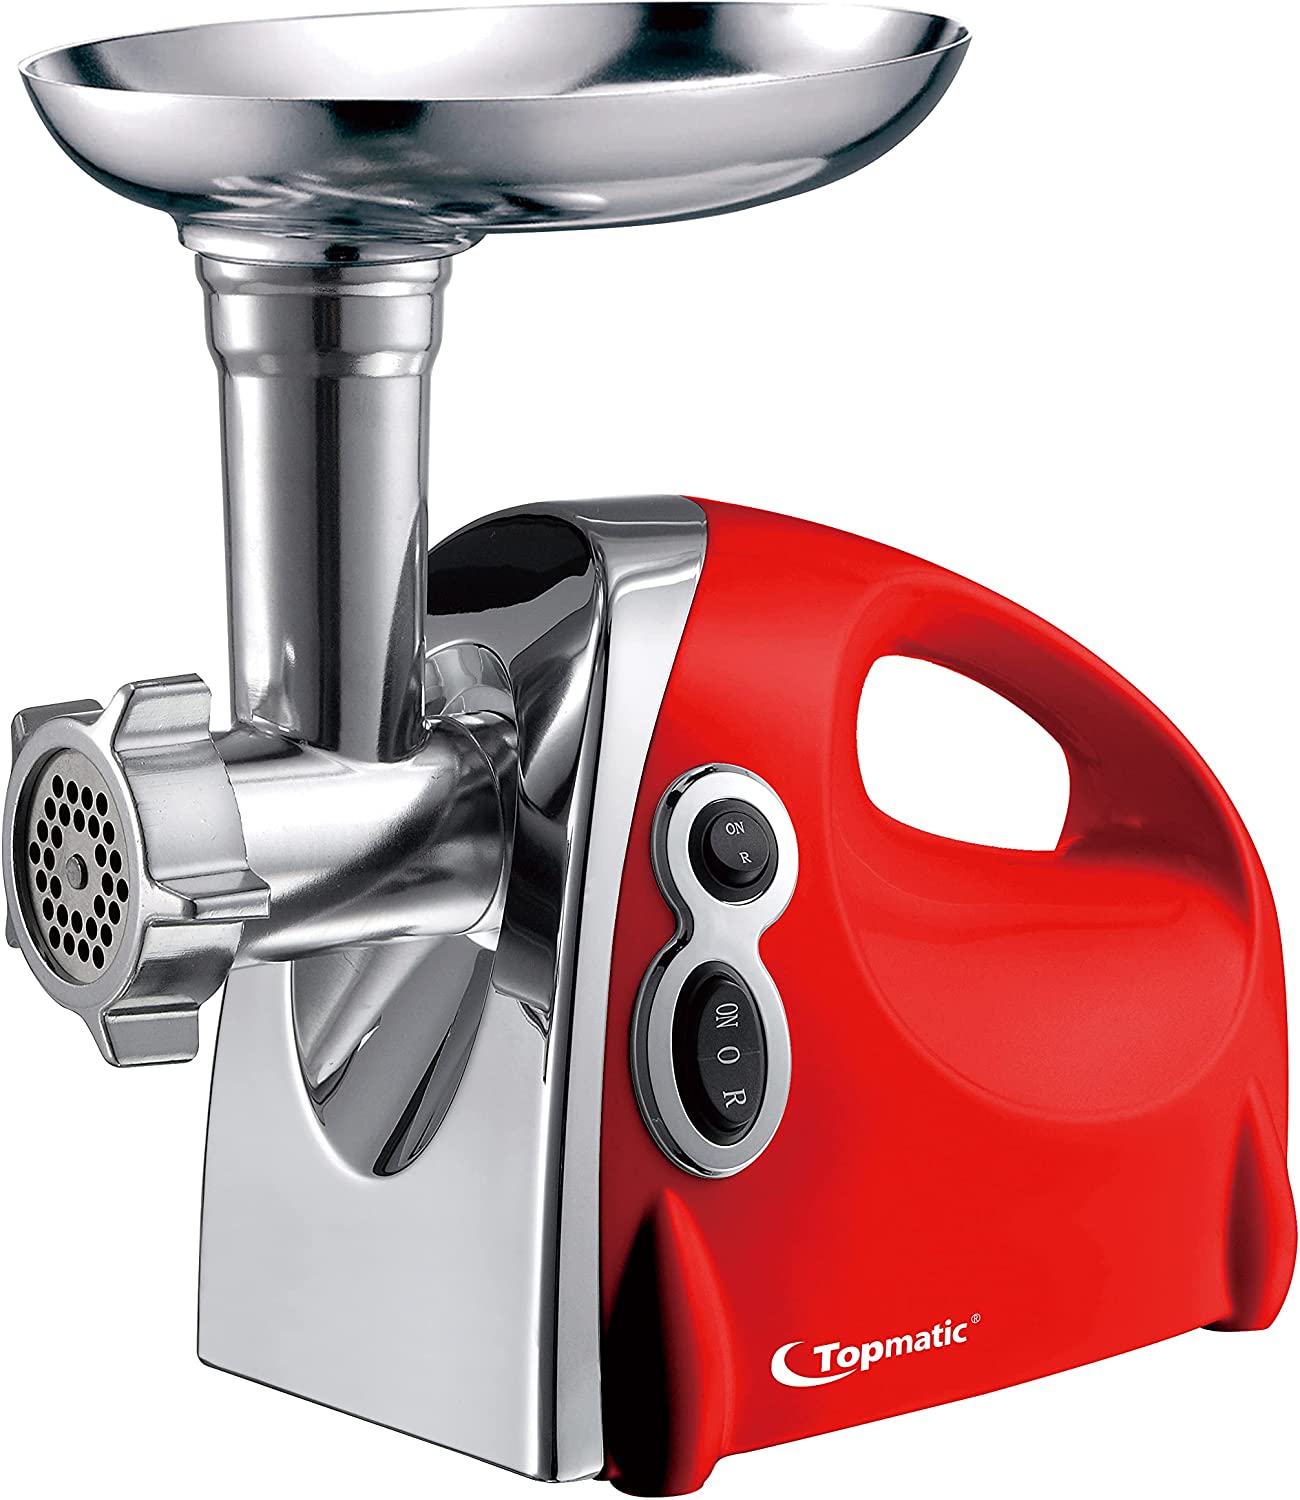 Topmatic MG-1200.3 Meat Mincer 1200 Plastic Stainless Steel Red